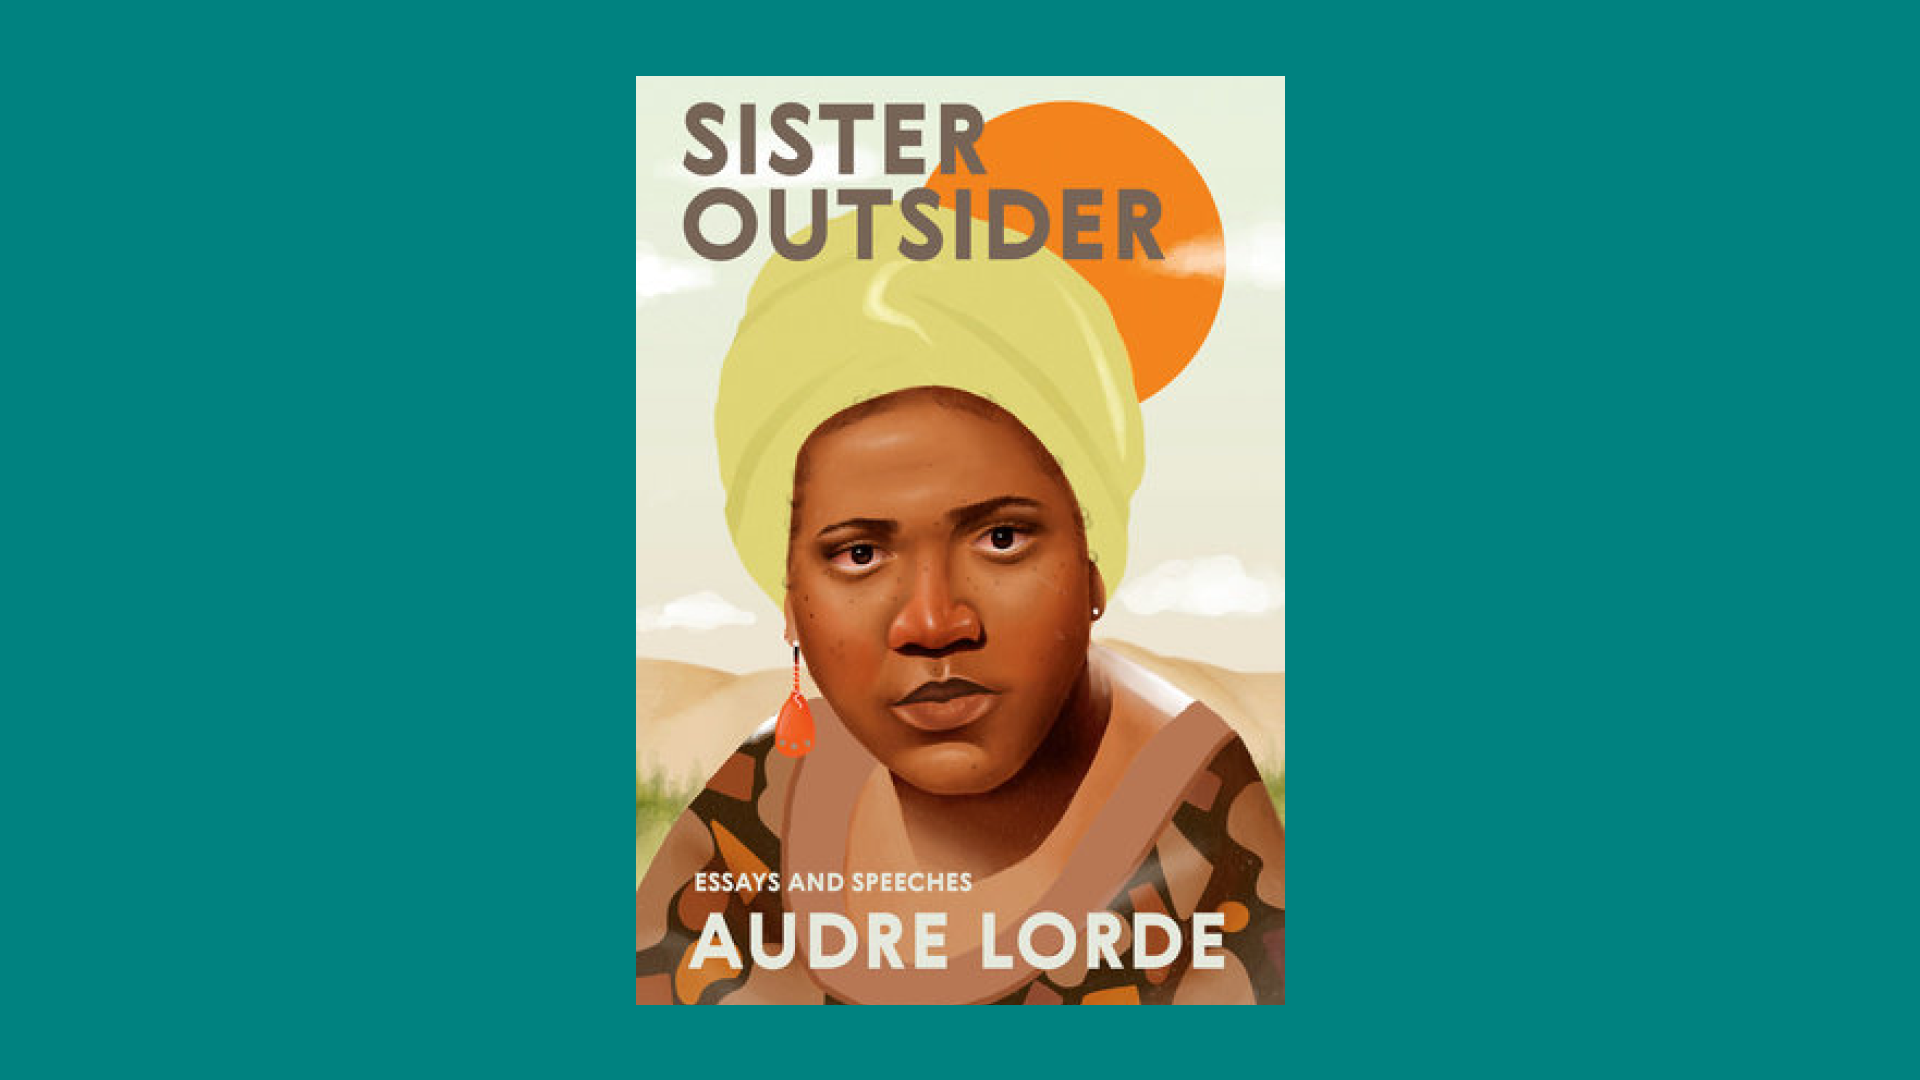 “Sister Outsider” by Audre Lorde